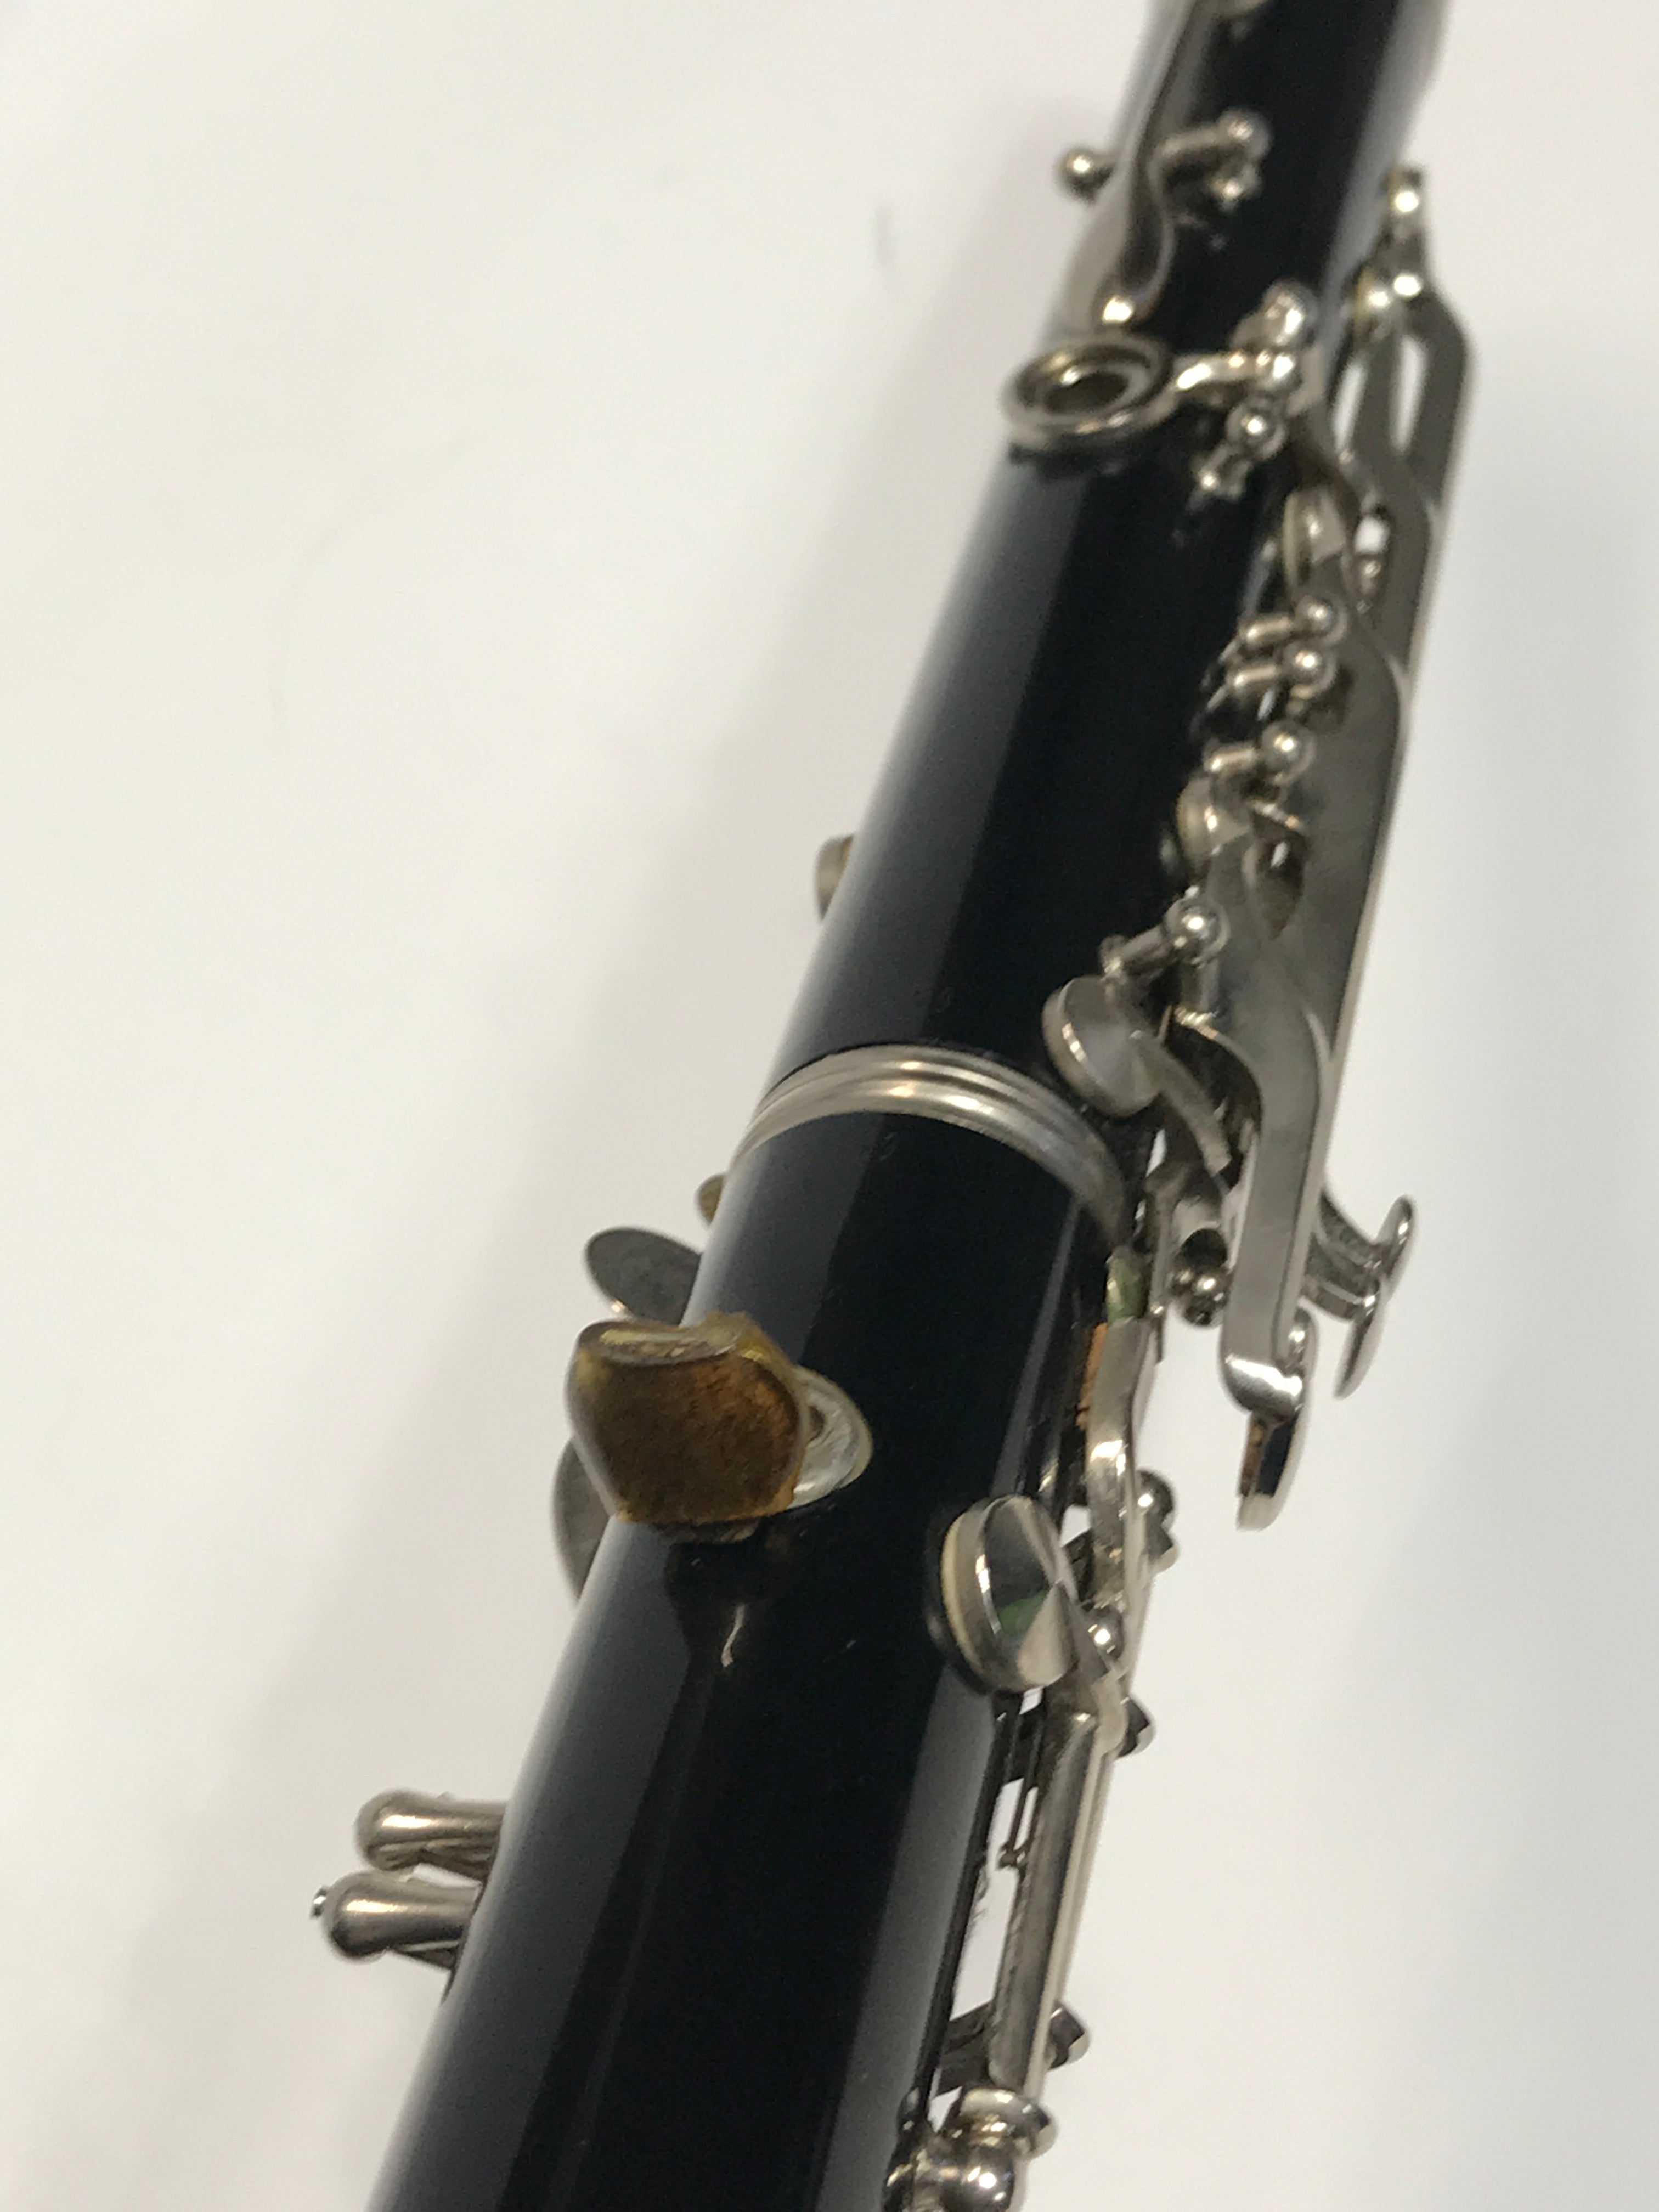 VITO Clarinet Plastic body good pads recently serviced plays well USED